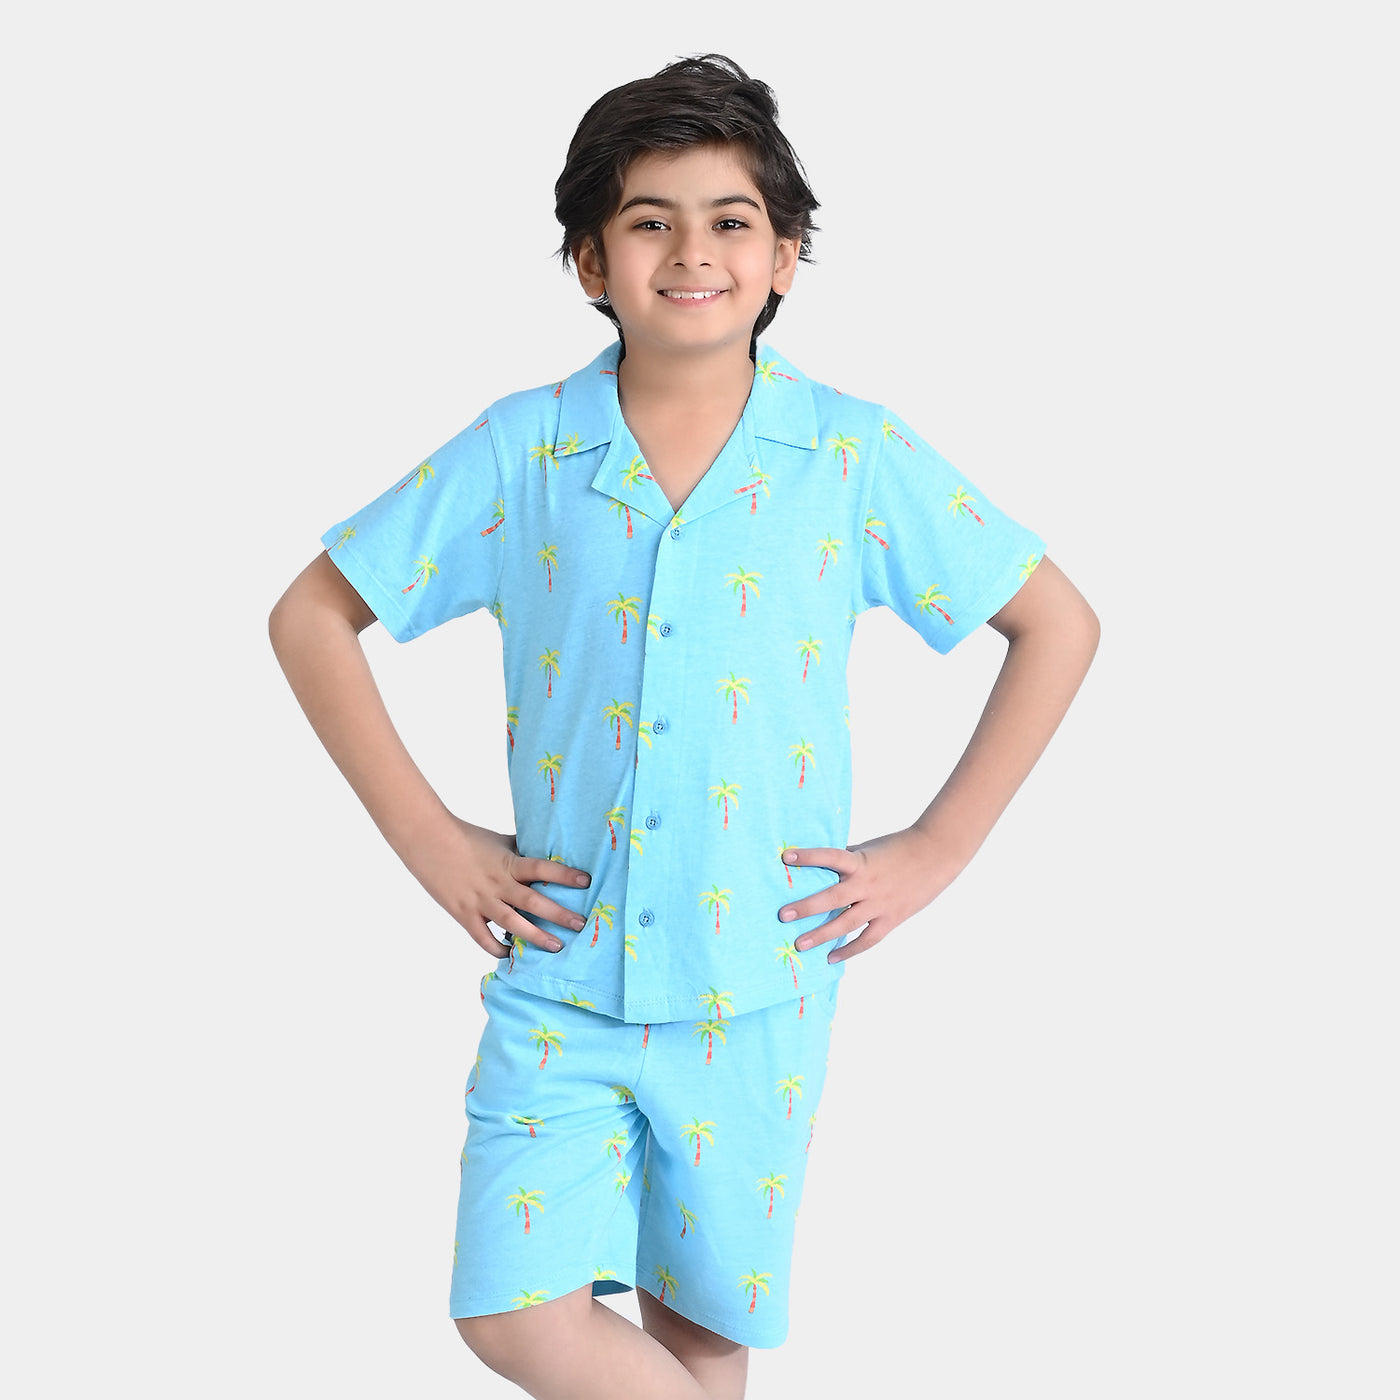 Boys Jersey/Terry 2 Piece Suit Palm Trees-Blue